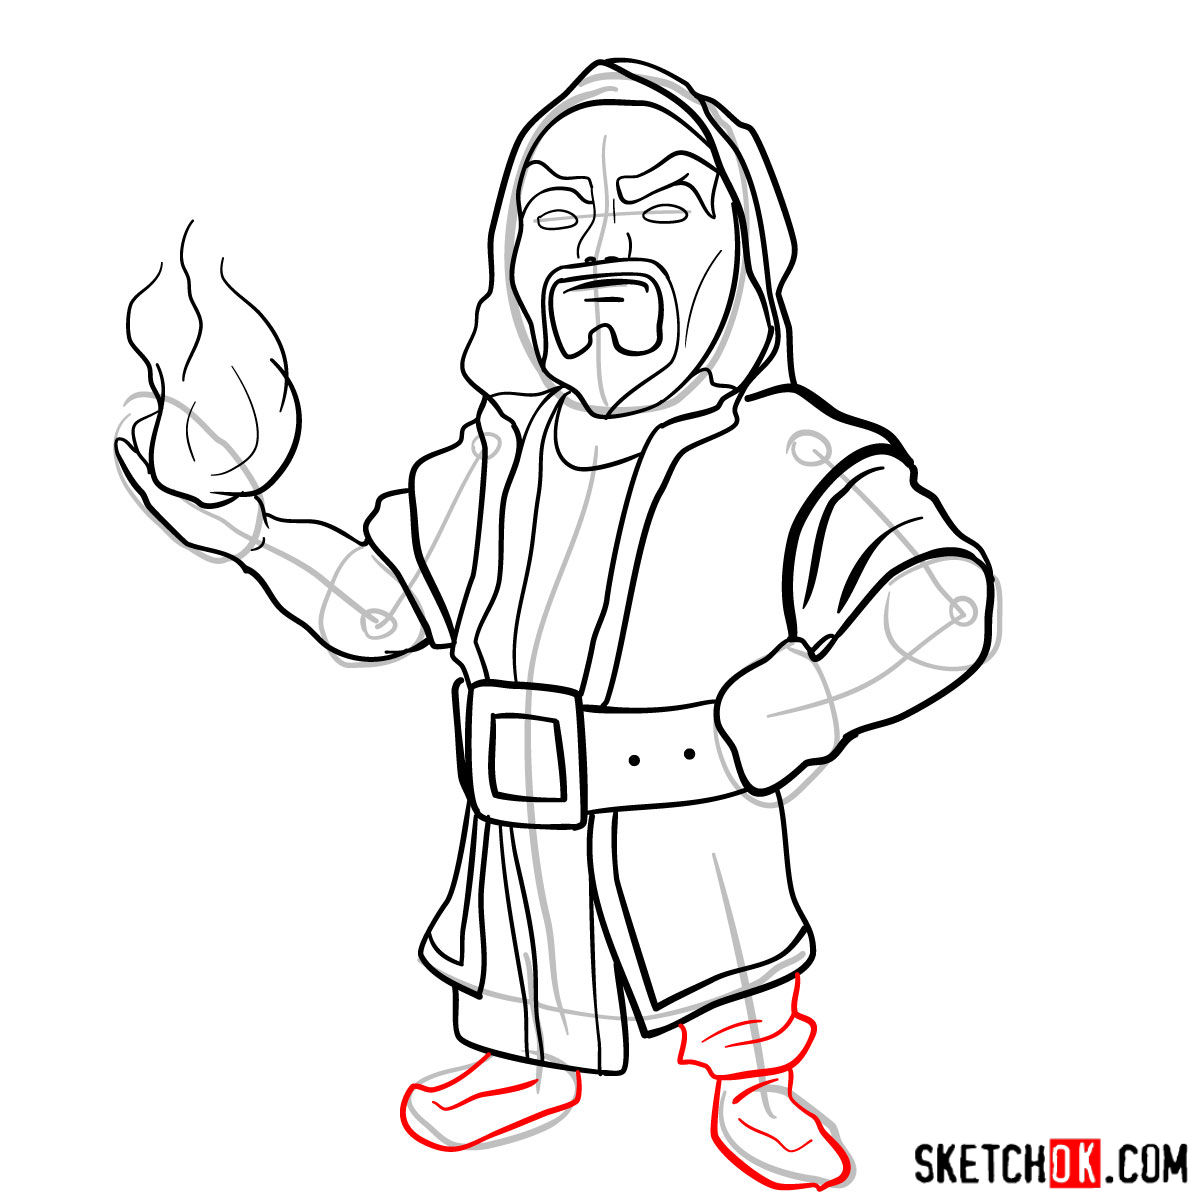 How to draw Wizard from Clash of Clans - step 11